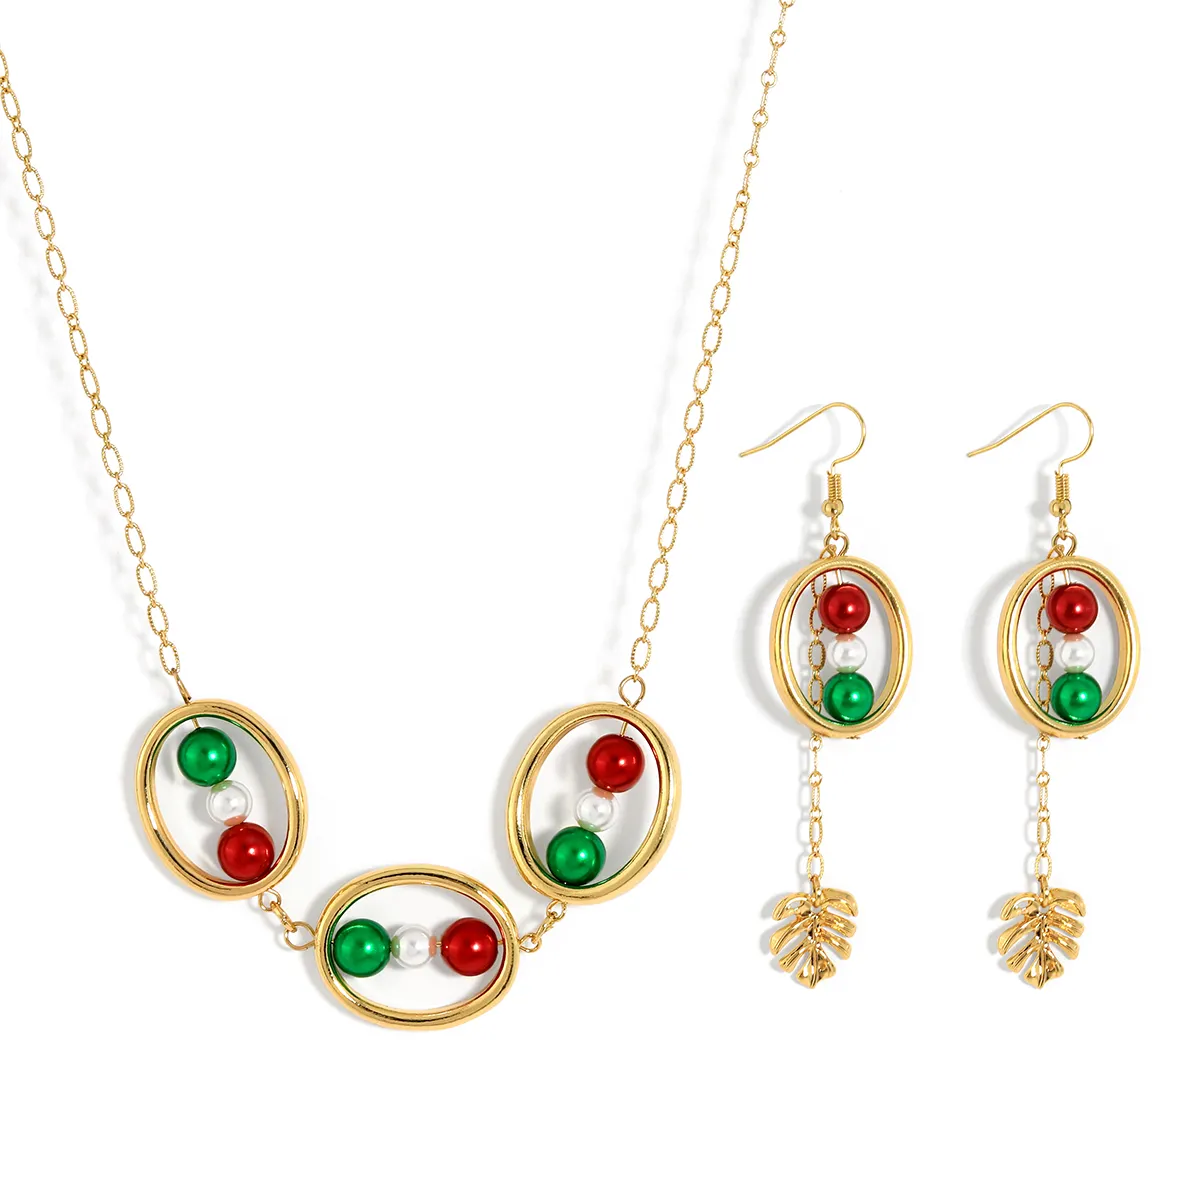 New luxury Christmas design hawaiian style 18k gold plated necklace and earring jewelry set boho earring gift